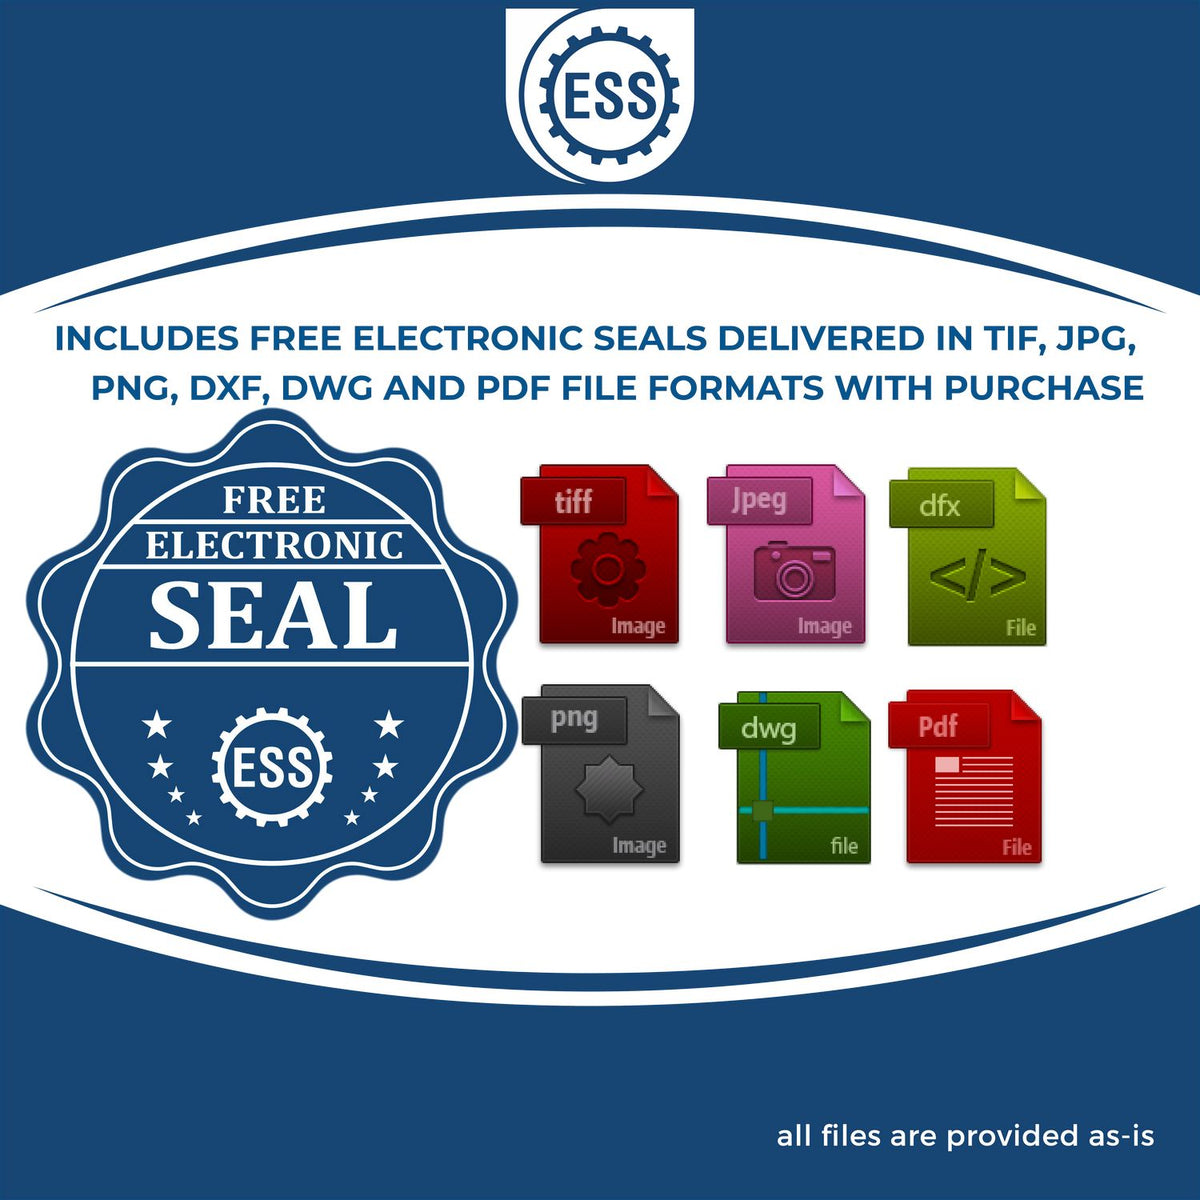 An infographic for the free electronic seal for the Handheld Georgia Professional Geologist Embosser illustrating the different file type icons such as DXF, DWG, TIF, JPG and PNG.